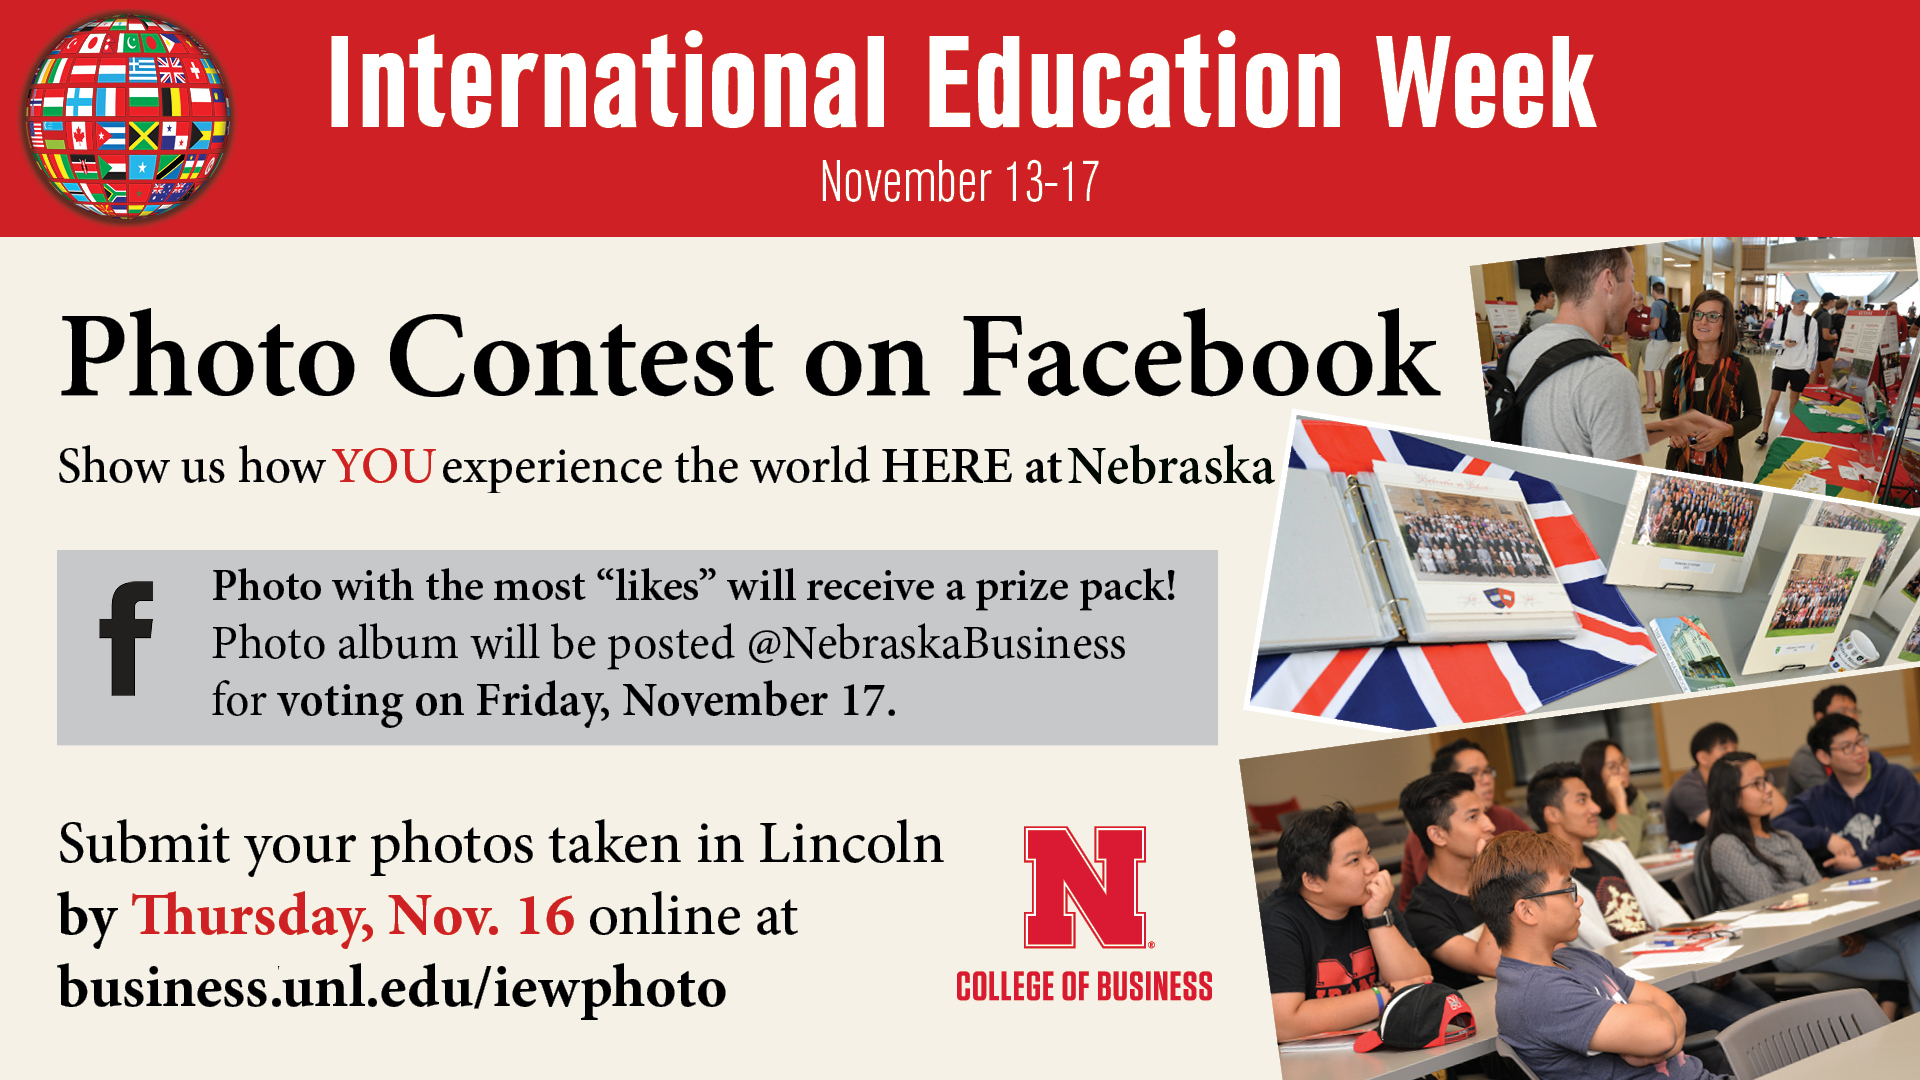 Submit your photo by November 16